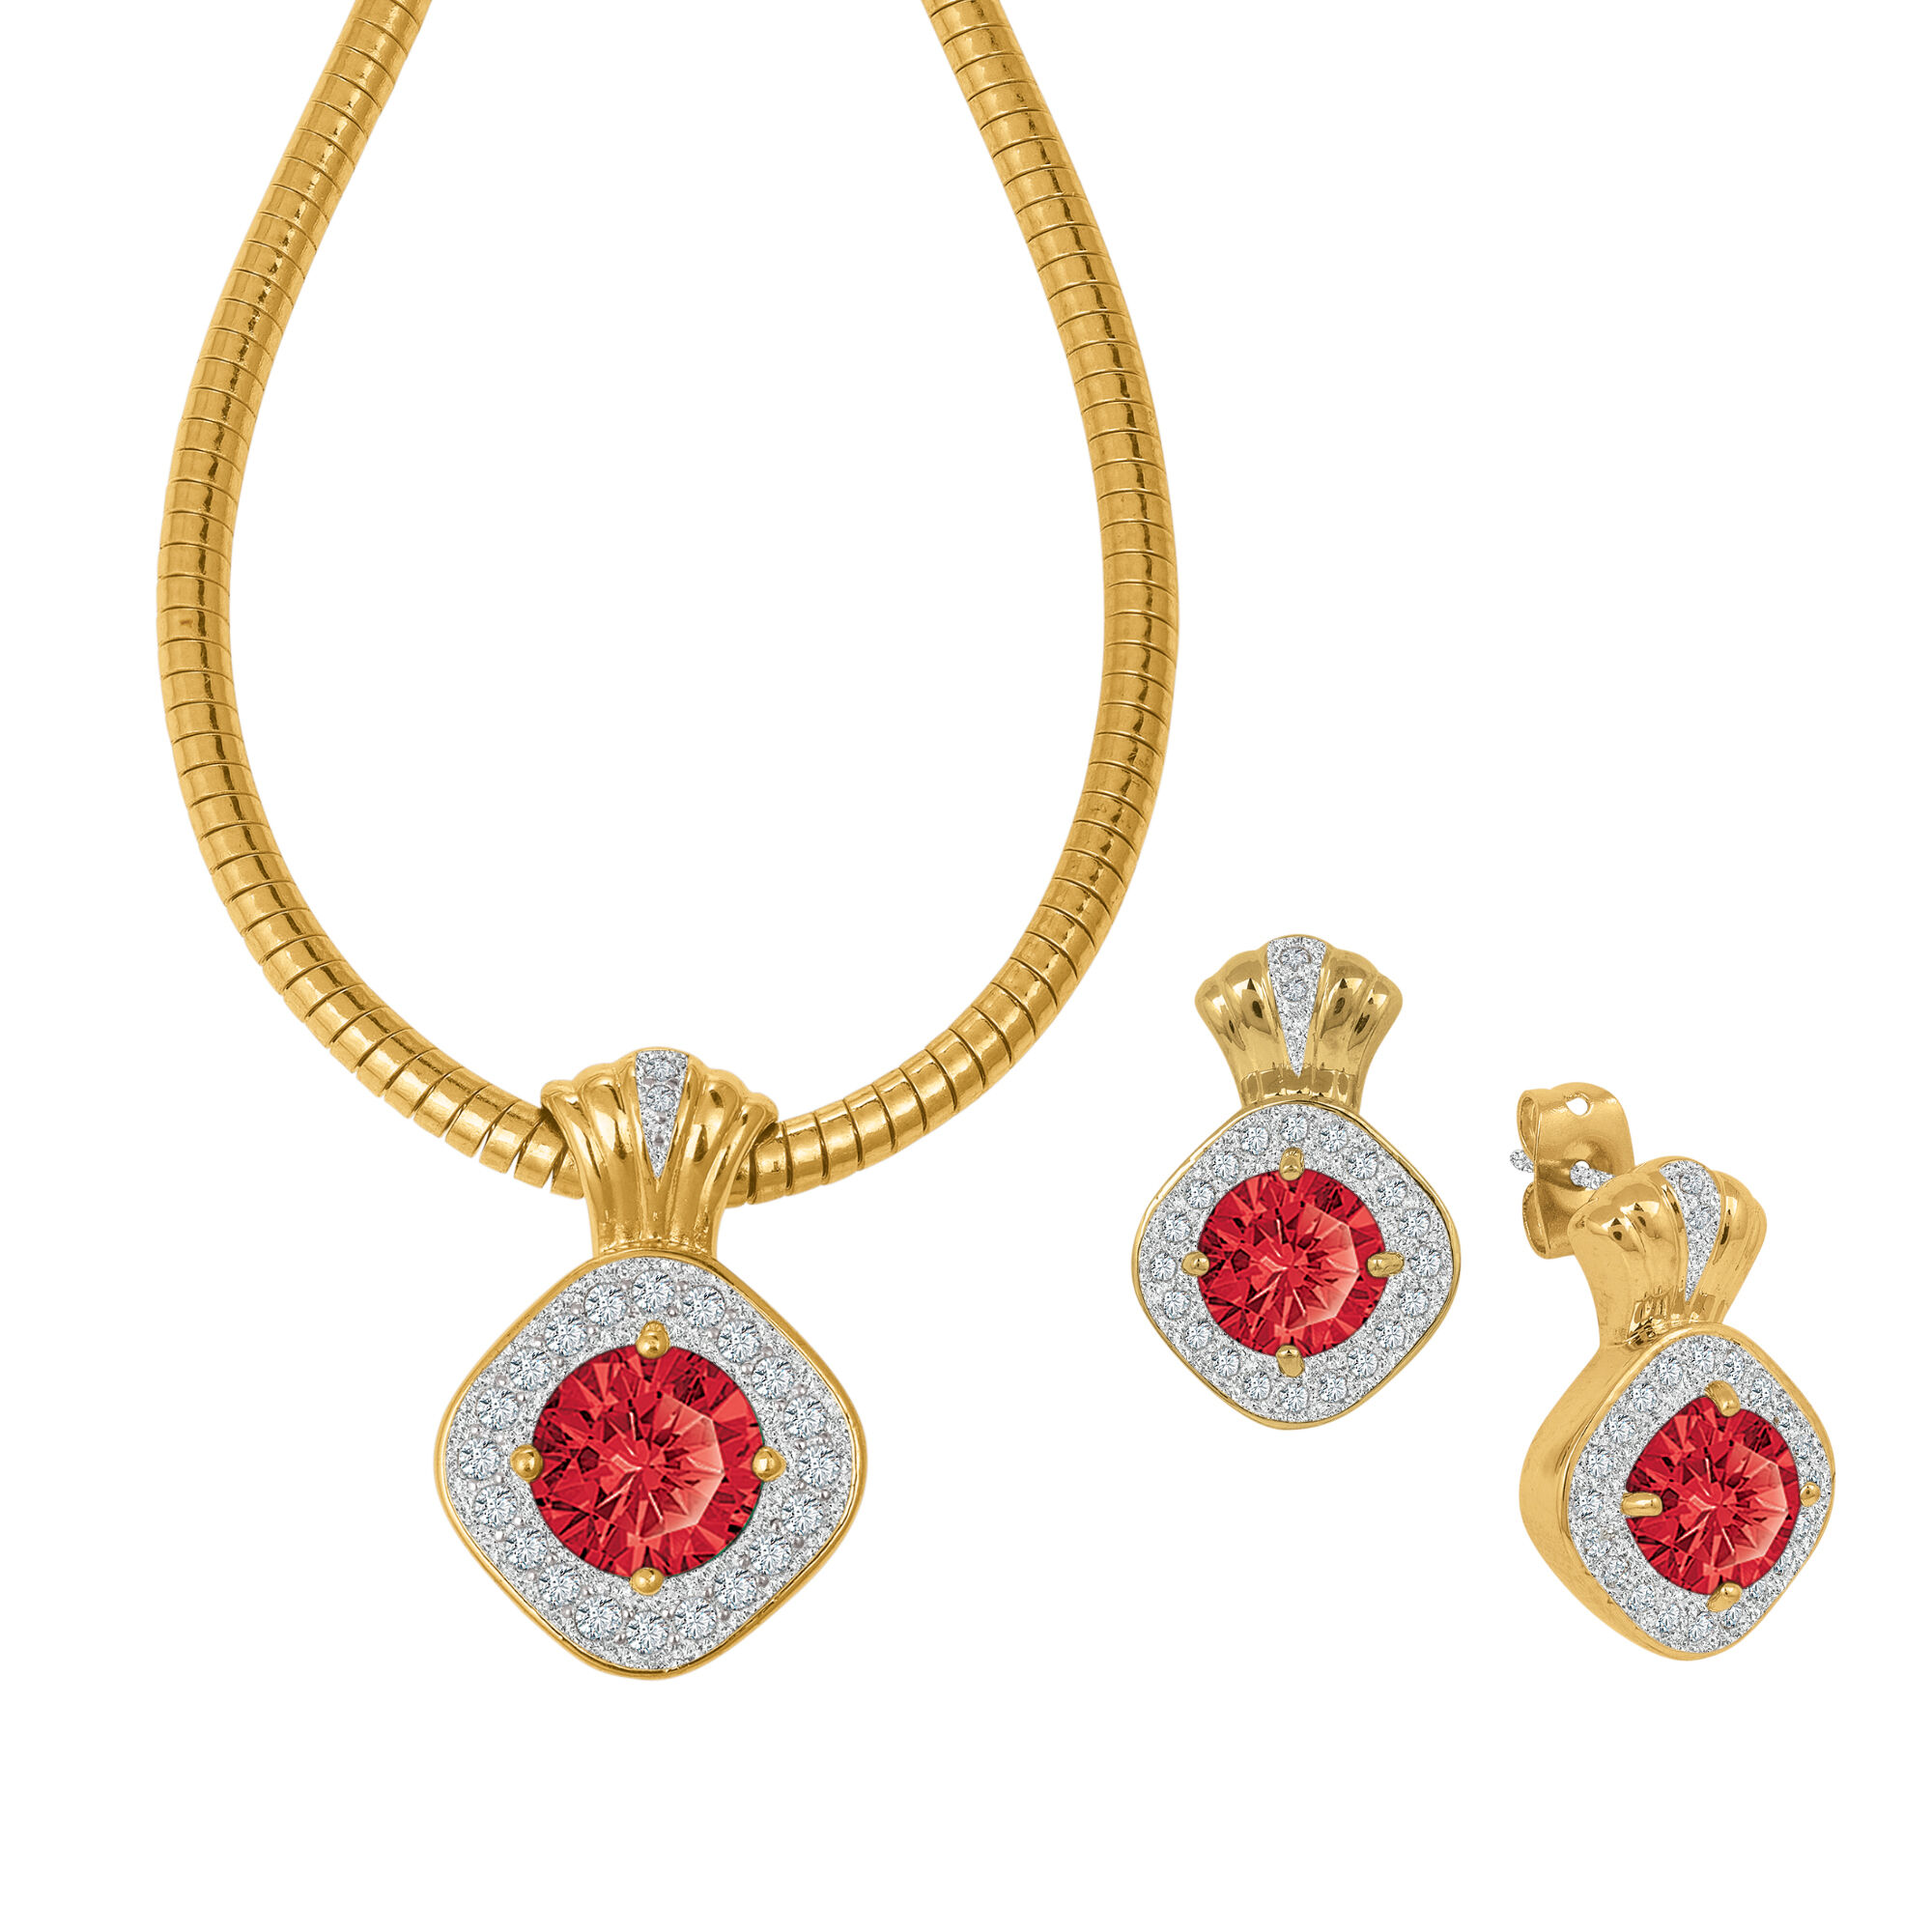 Birthstone Necklace Earring Set 10787 0016 g july